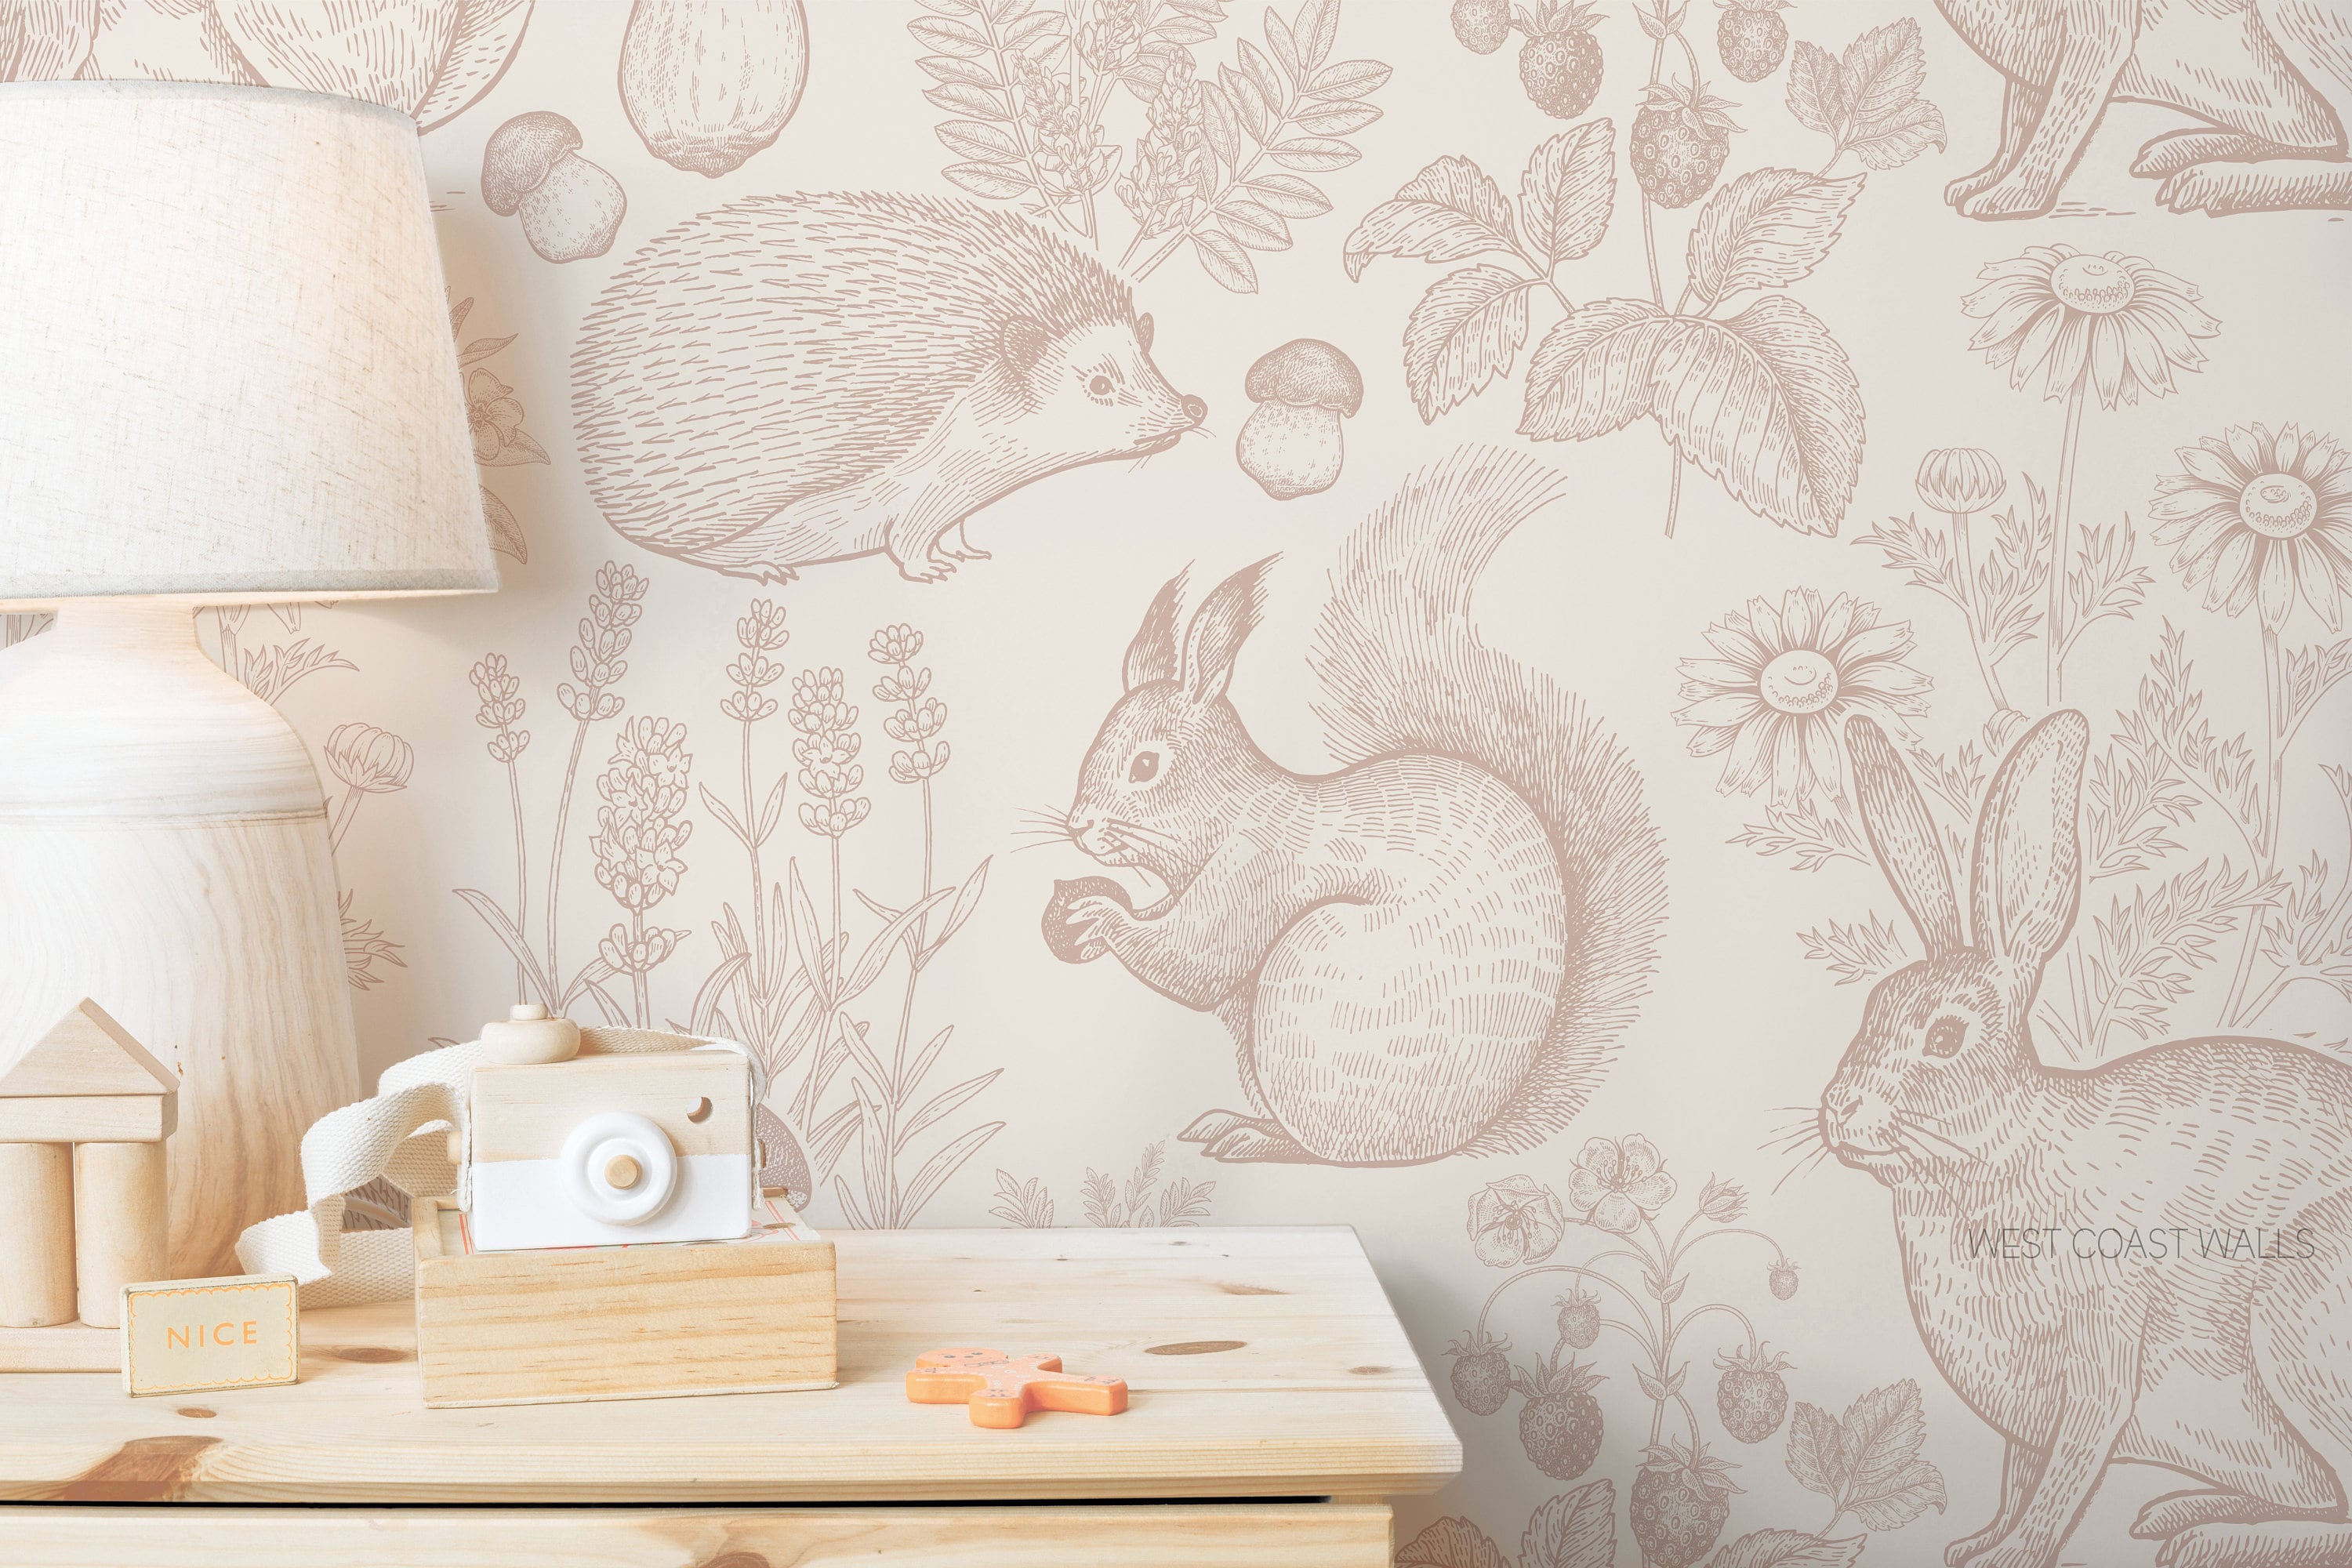 Amazoncom Forest Animals Removable Wallpaper  Colorful Self Adhesive  Wall Paper Fabric  Nursery Kids Room Peel and Stick Woodland Critters  CC135  Handmade Products